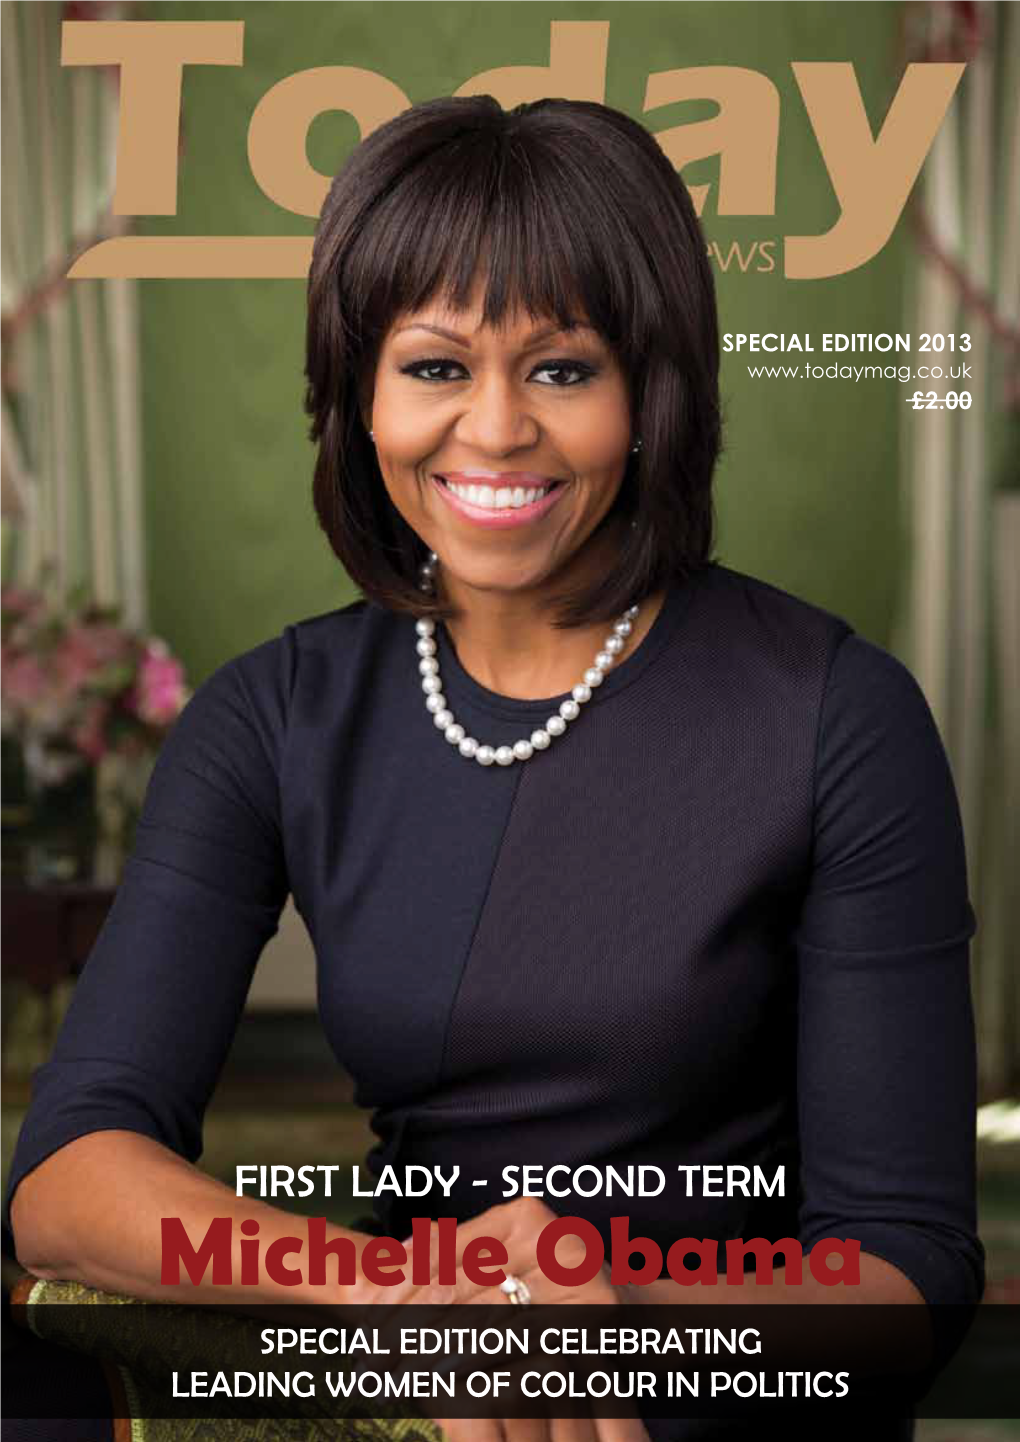 Michelle Obama Special Edition Celebrating Leading Women of Colour in Politics Todadiversity News Special Edition 2013